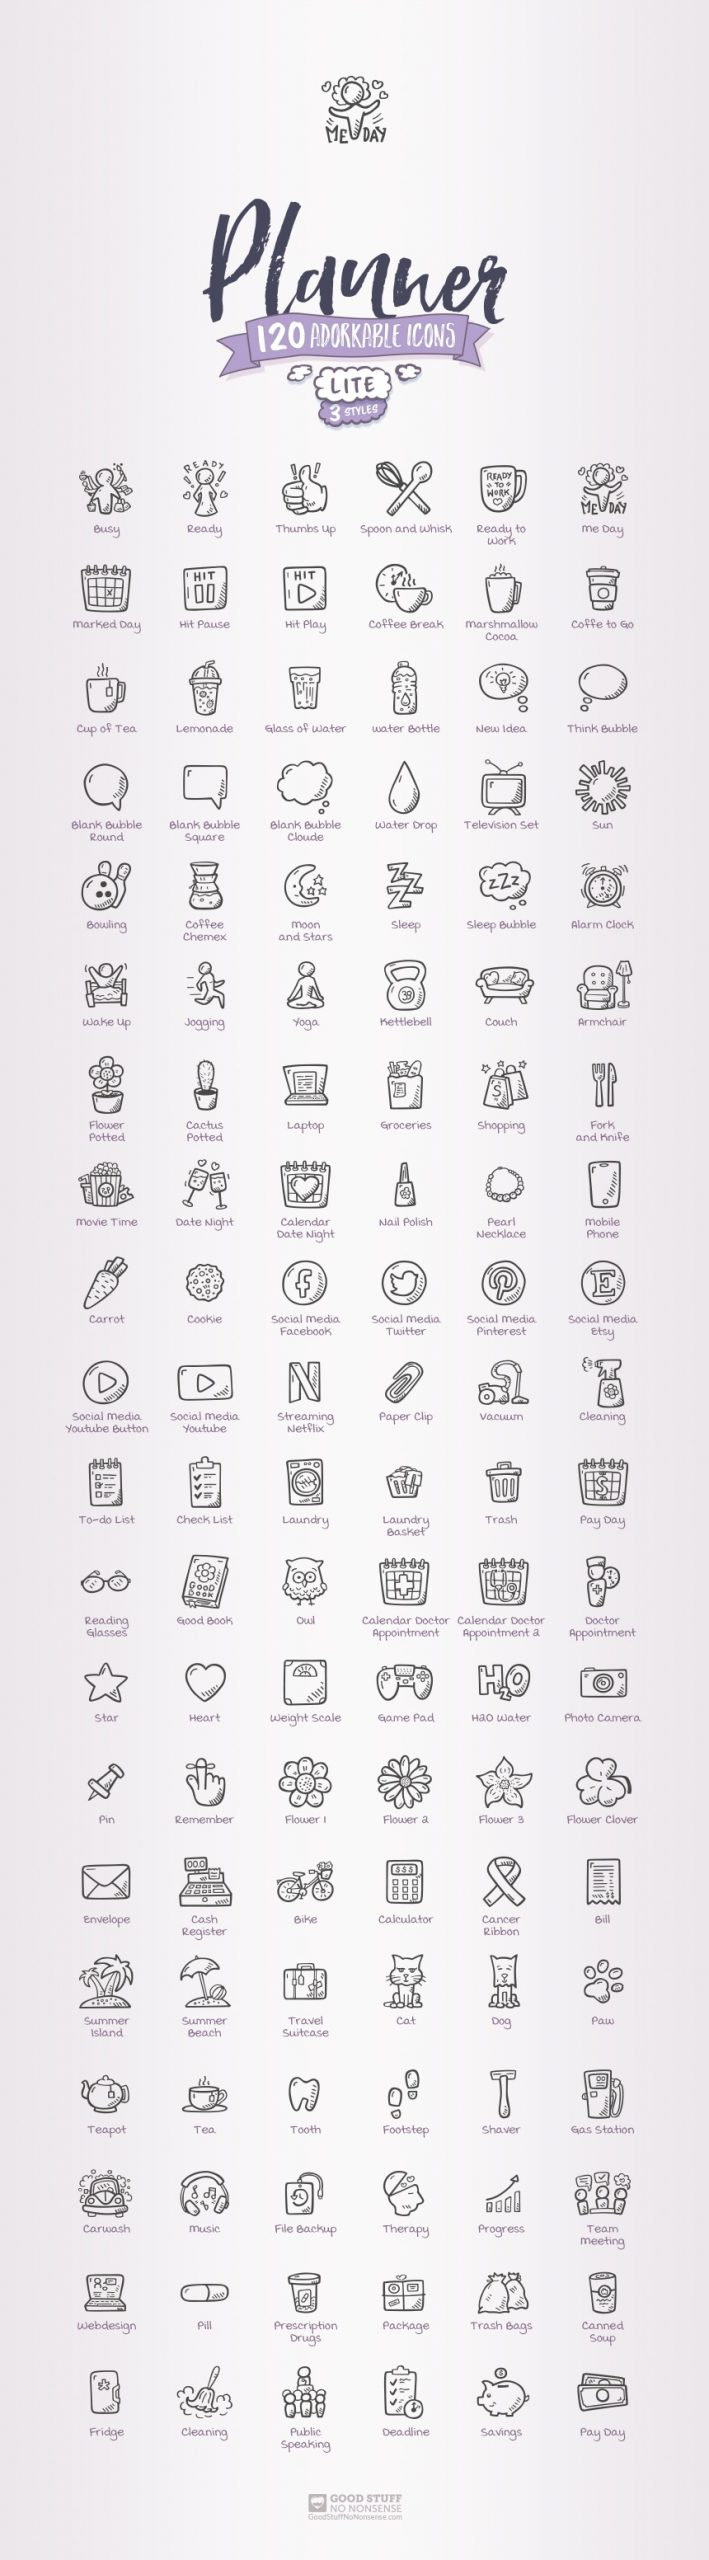 Planner Hand Drawn Icons - 120 Cute doodles